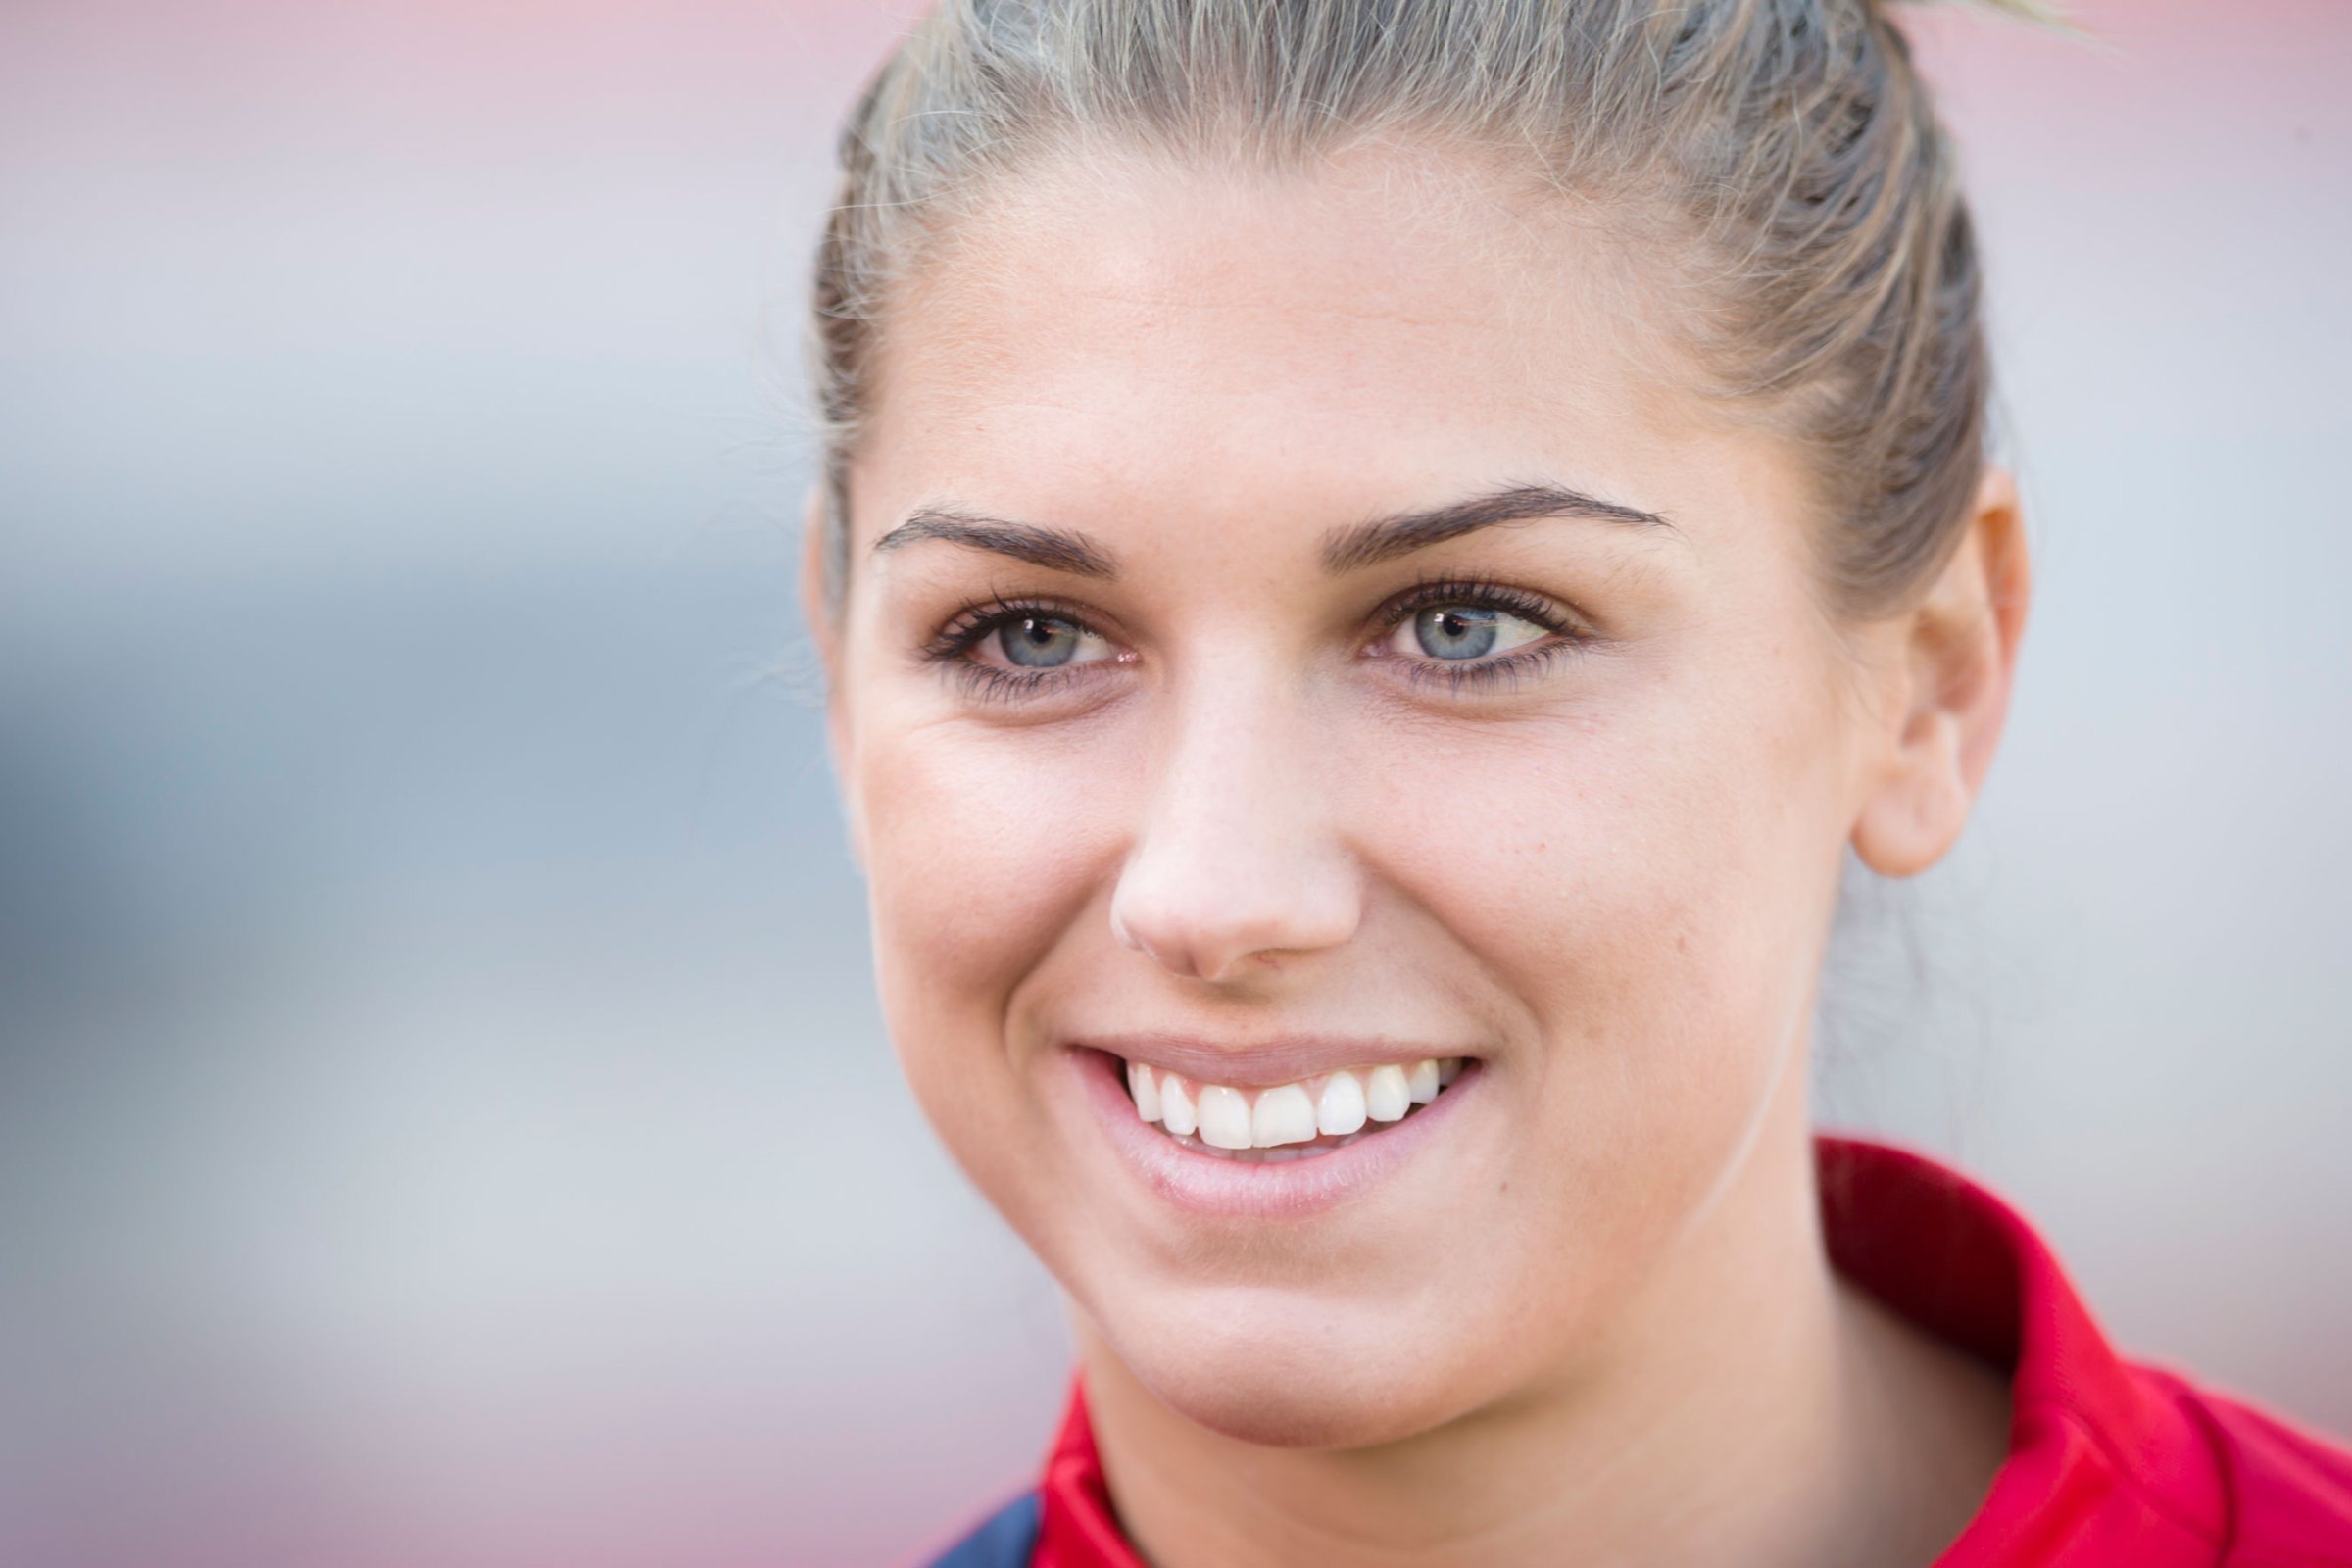 Alex Morgan of the USA Women's National Team at Candlestick Park in San Francisco on Oct. 26, 2013.